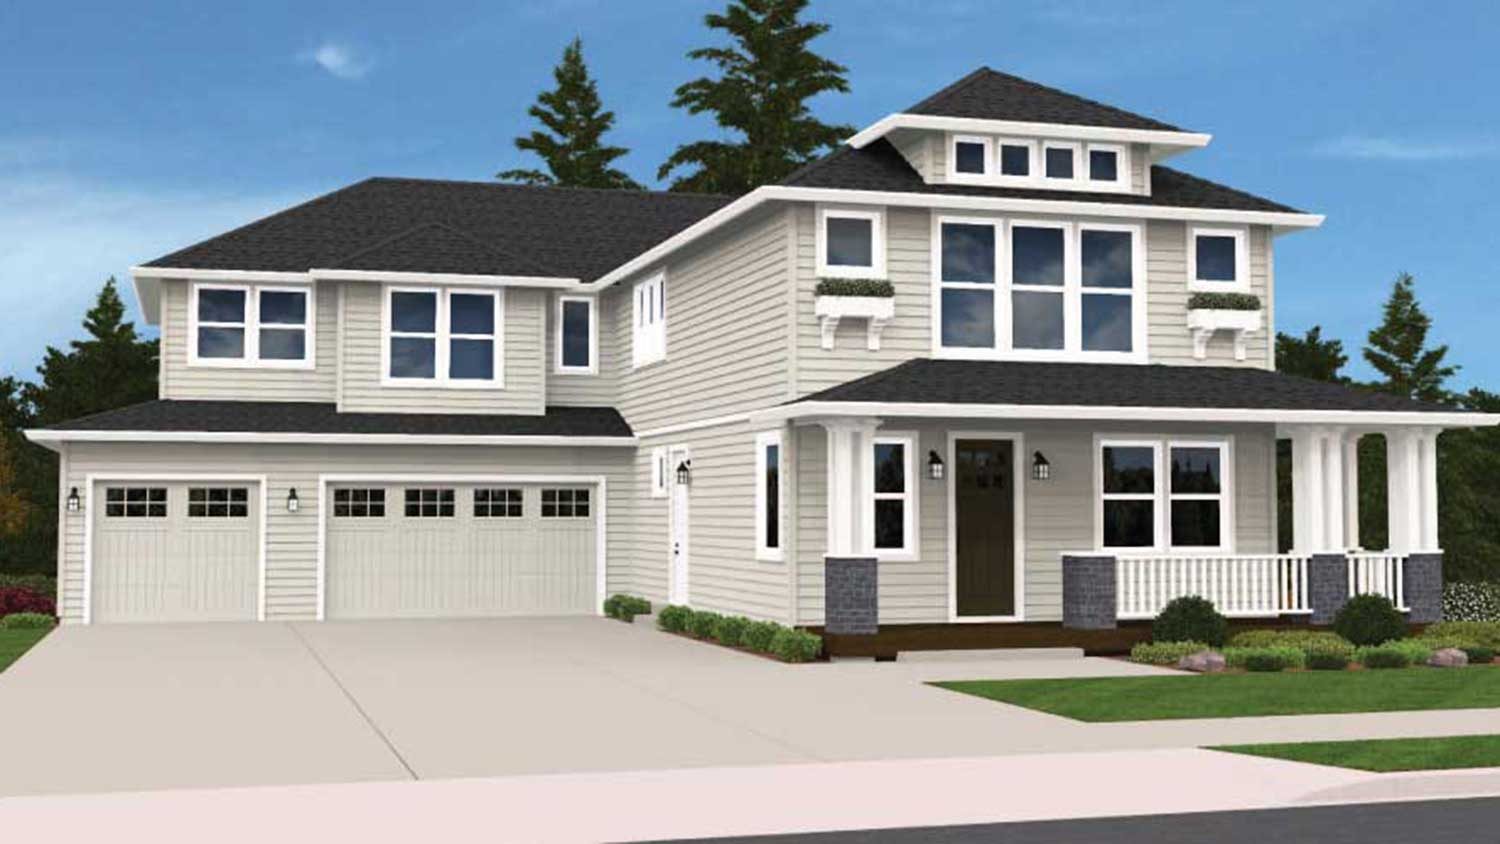 Rendering of the Westmont home by Kingston Homes